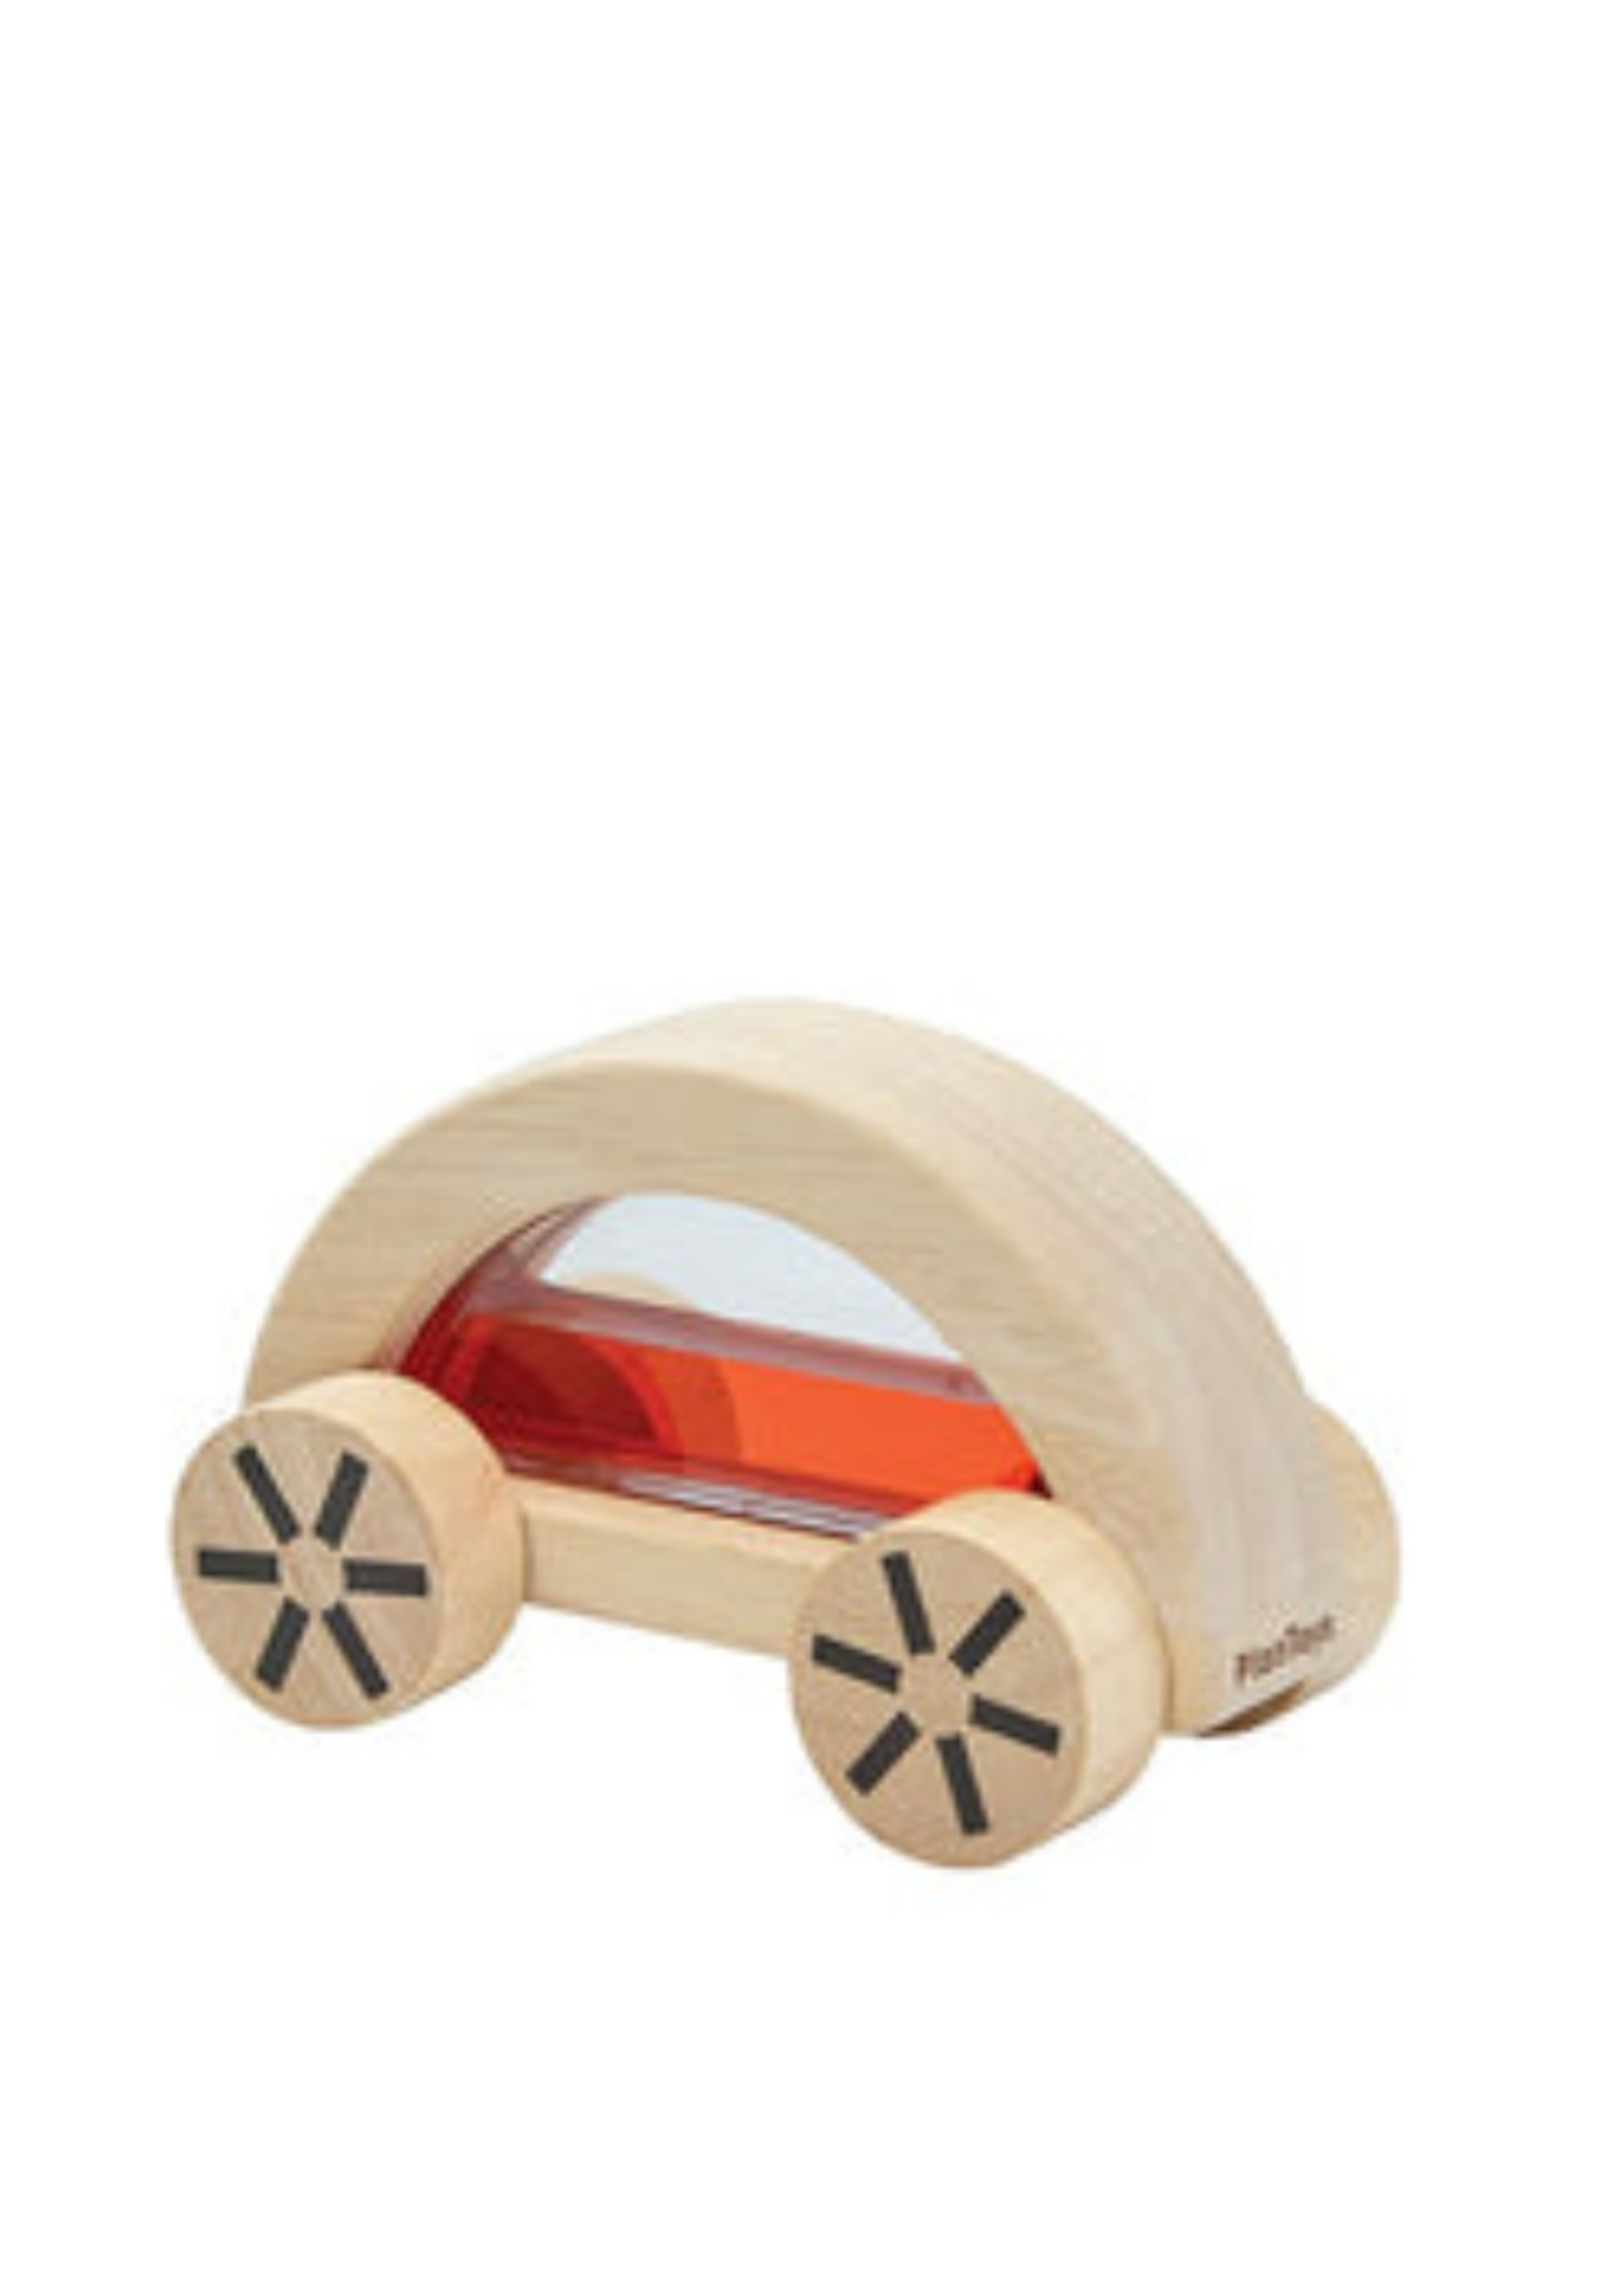 Plan Toys Wautomobile - Red